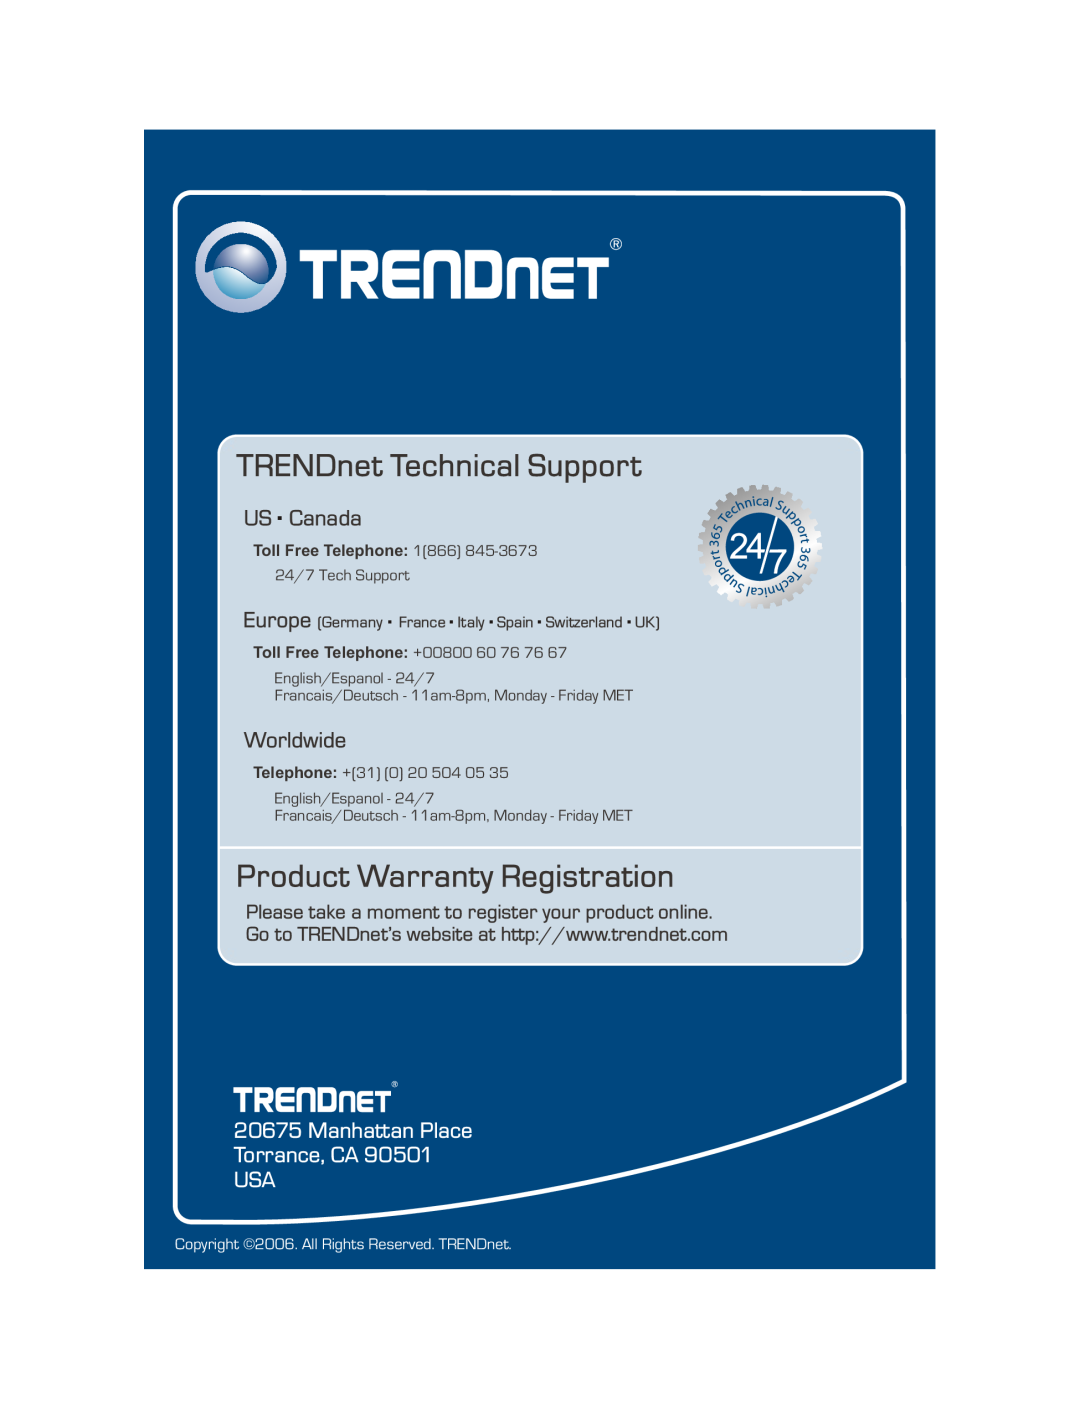 TRENDnet S800i TRENDnet Technical Support, Product Warranty Registration, US . Canada, Worldwide, Toll Free Telephone 